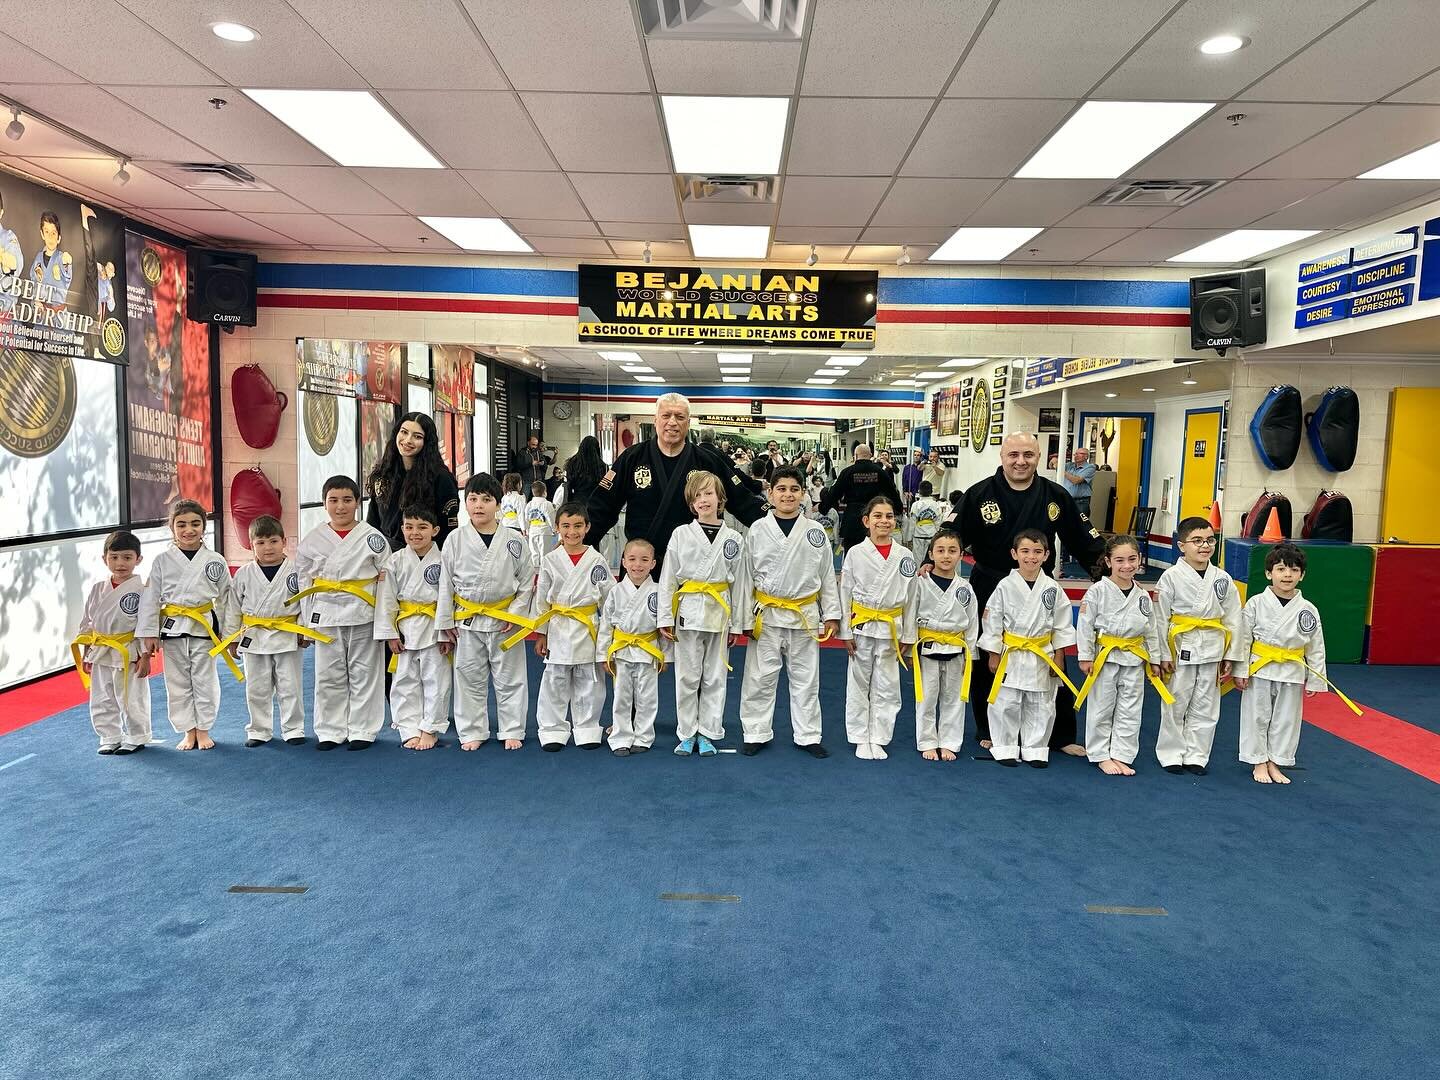 Congratulations to our students on their rank advancement.
Bejanian Martial Arts